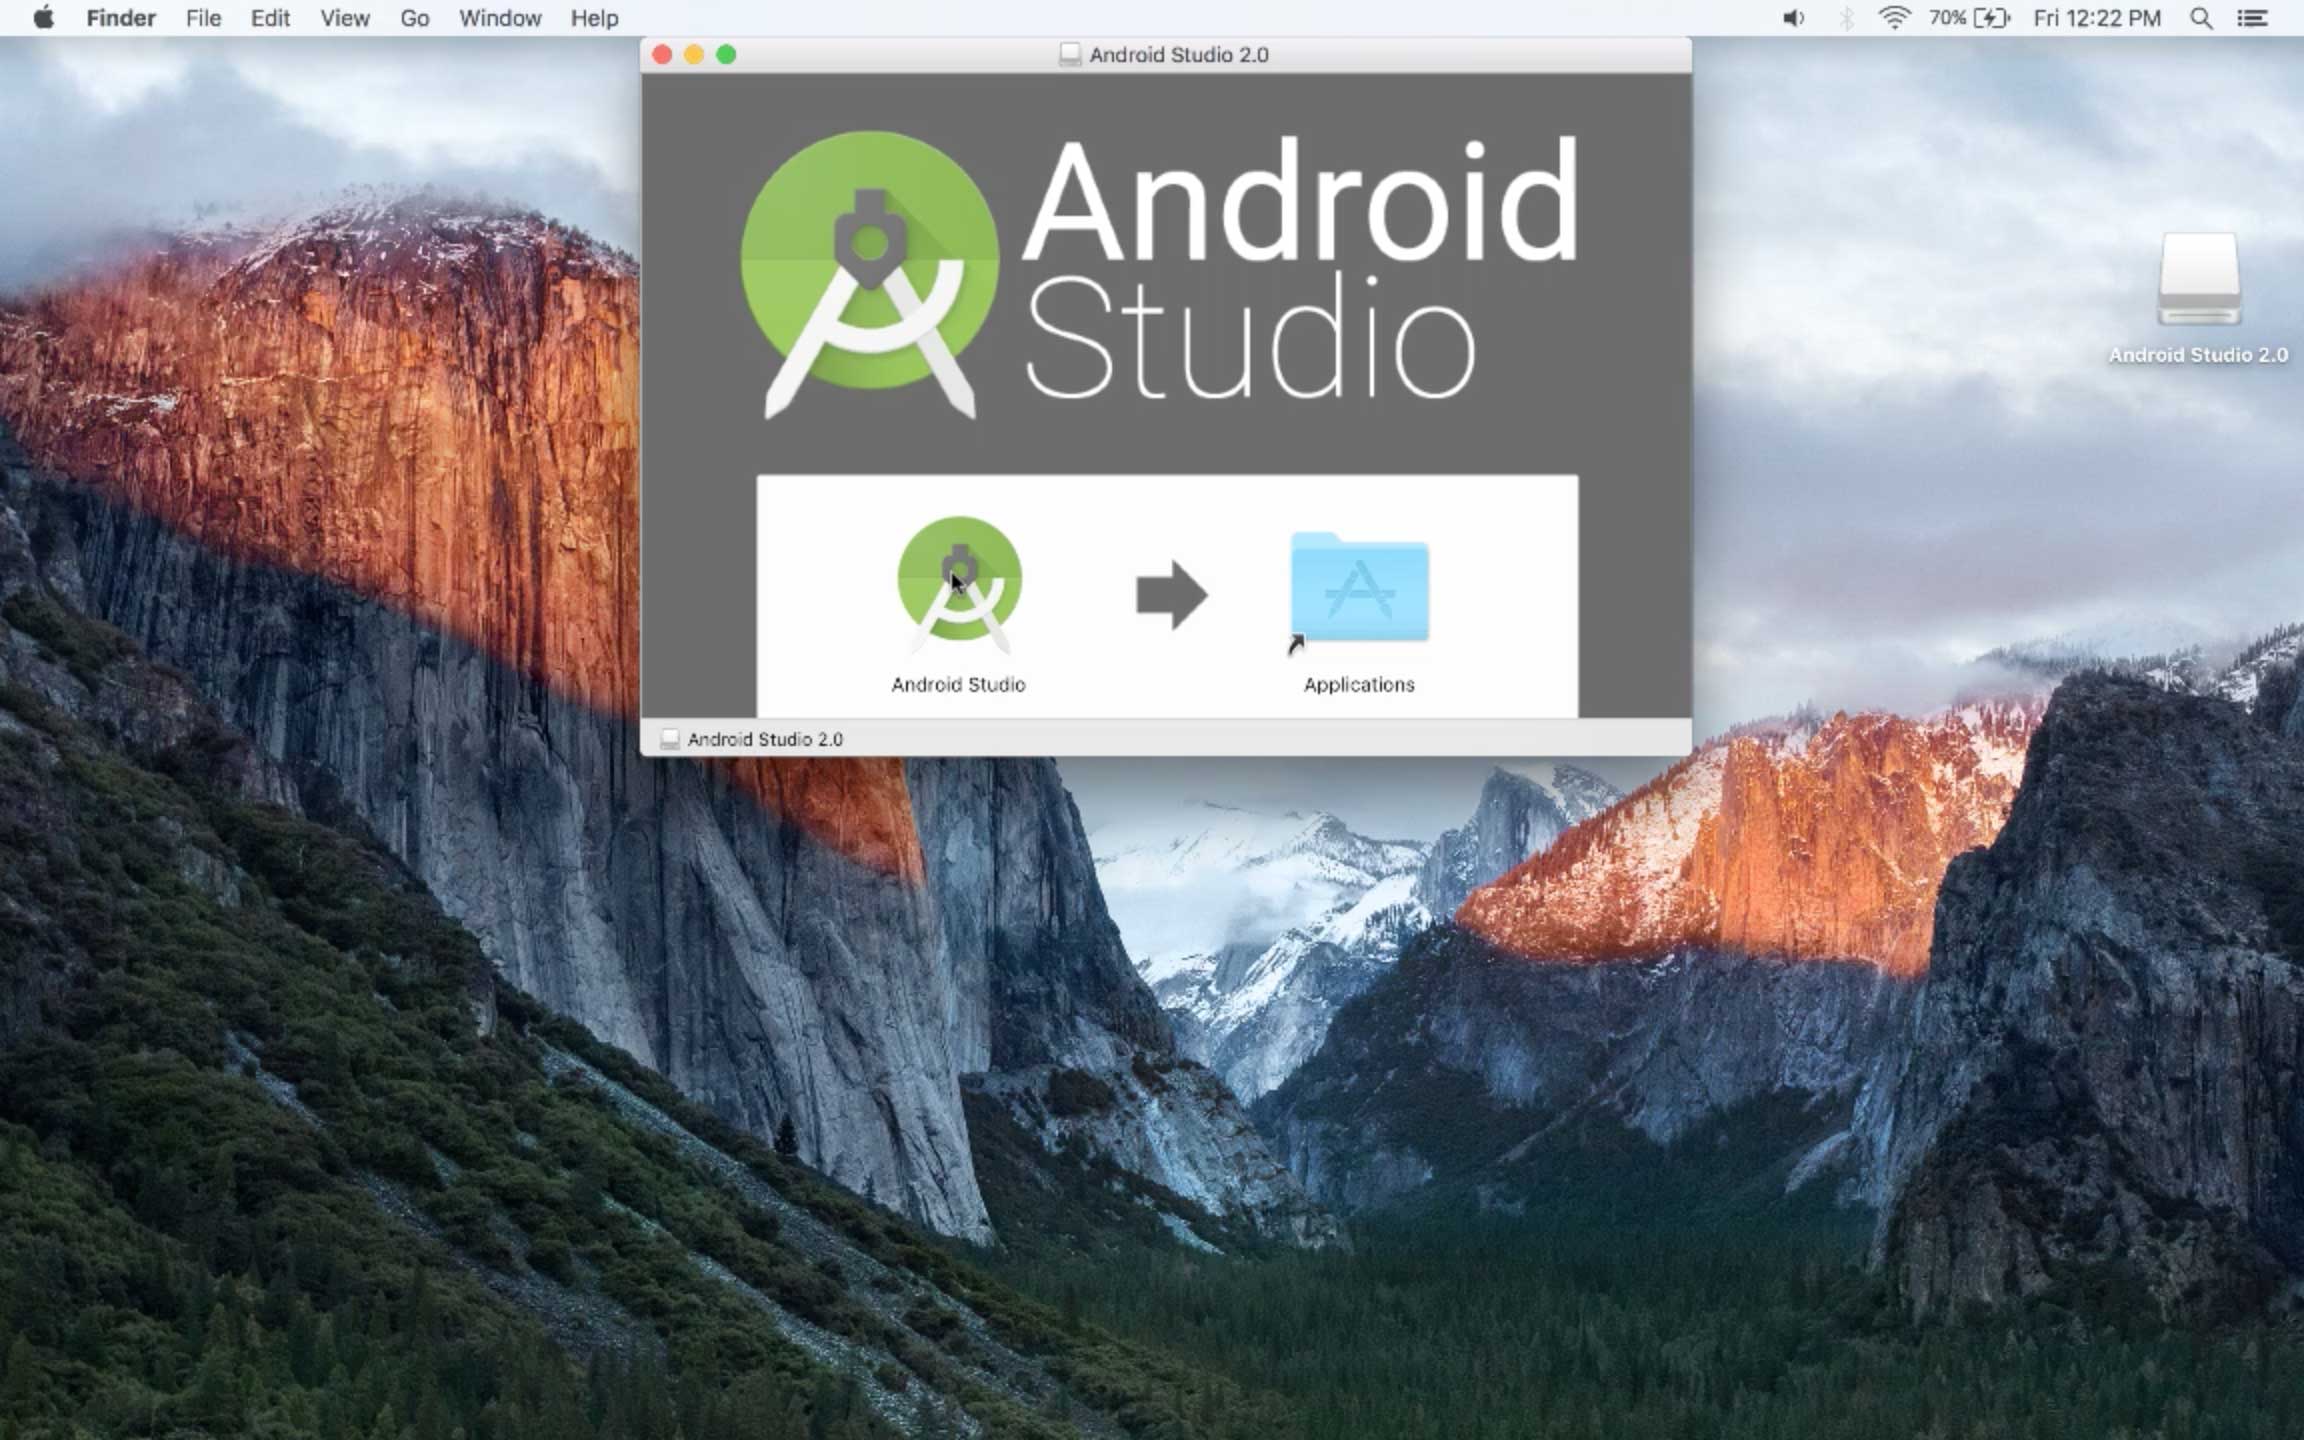 download android studio on mac